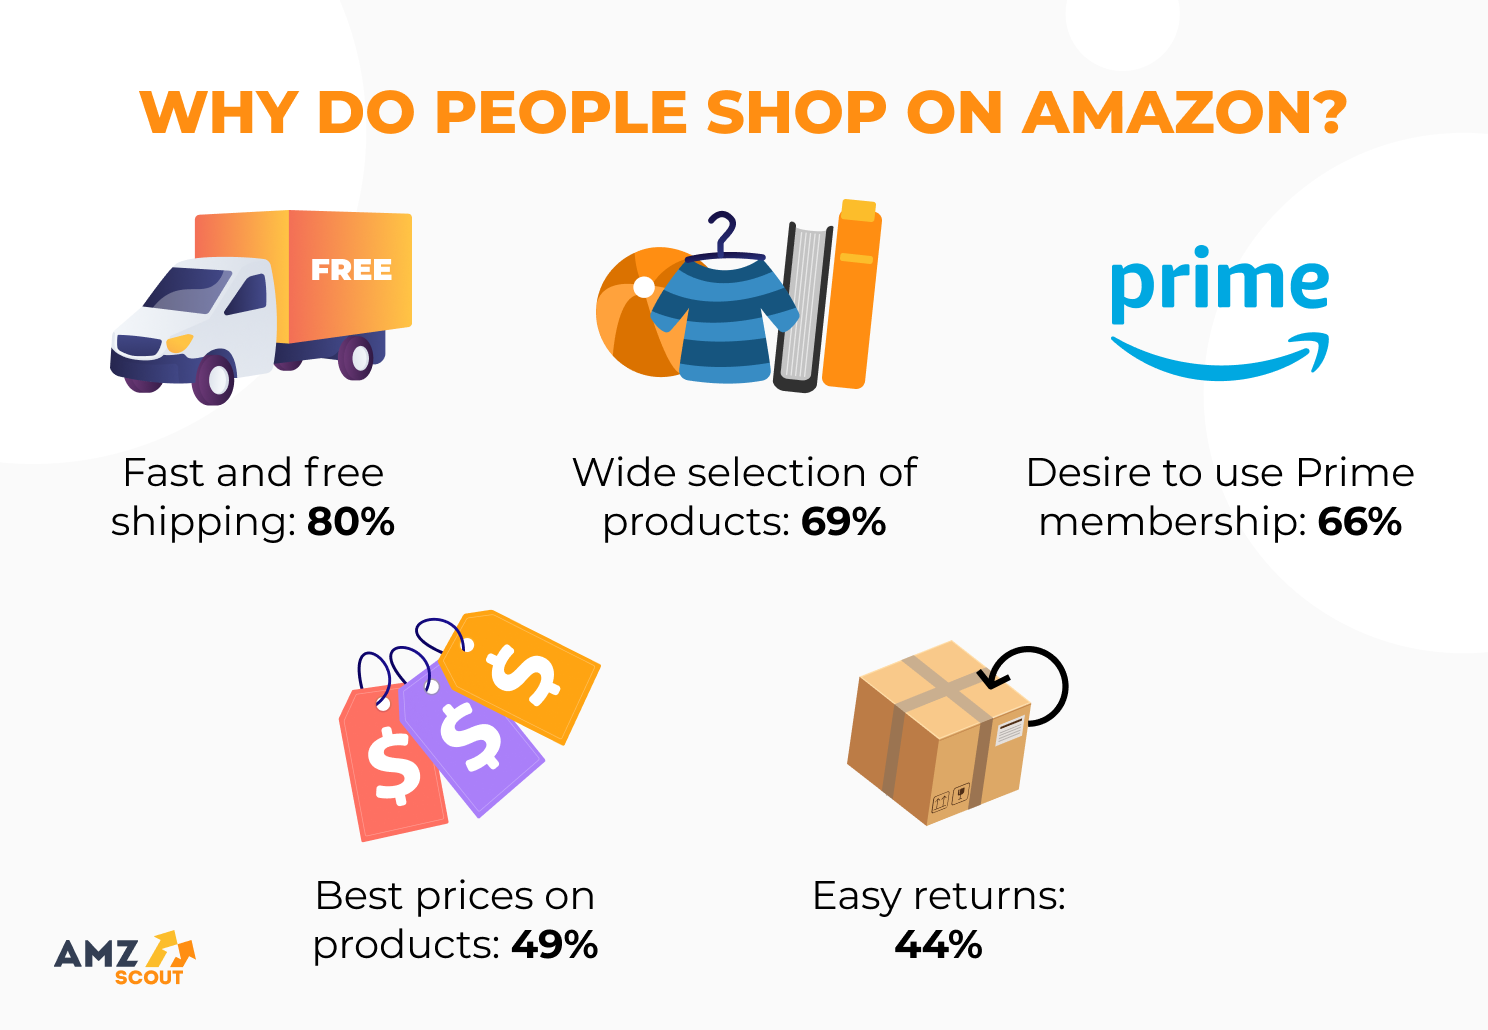 Reasons why people shop on Amazon